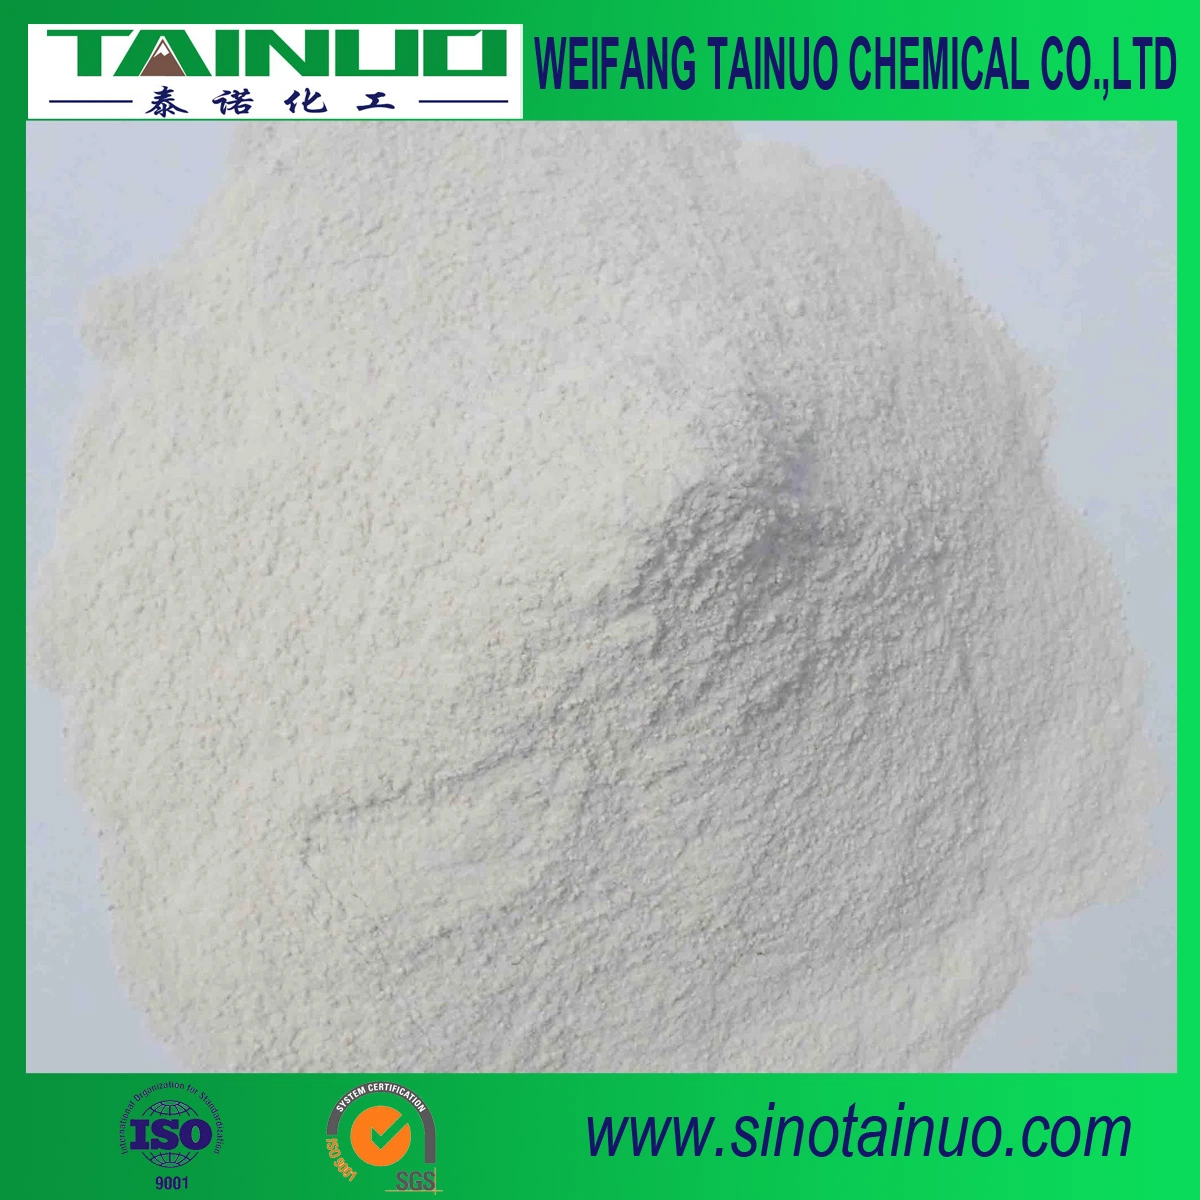 Factory Price Calcium Formate Feed Additives Grade China Supplier